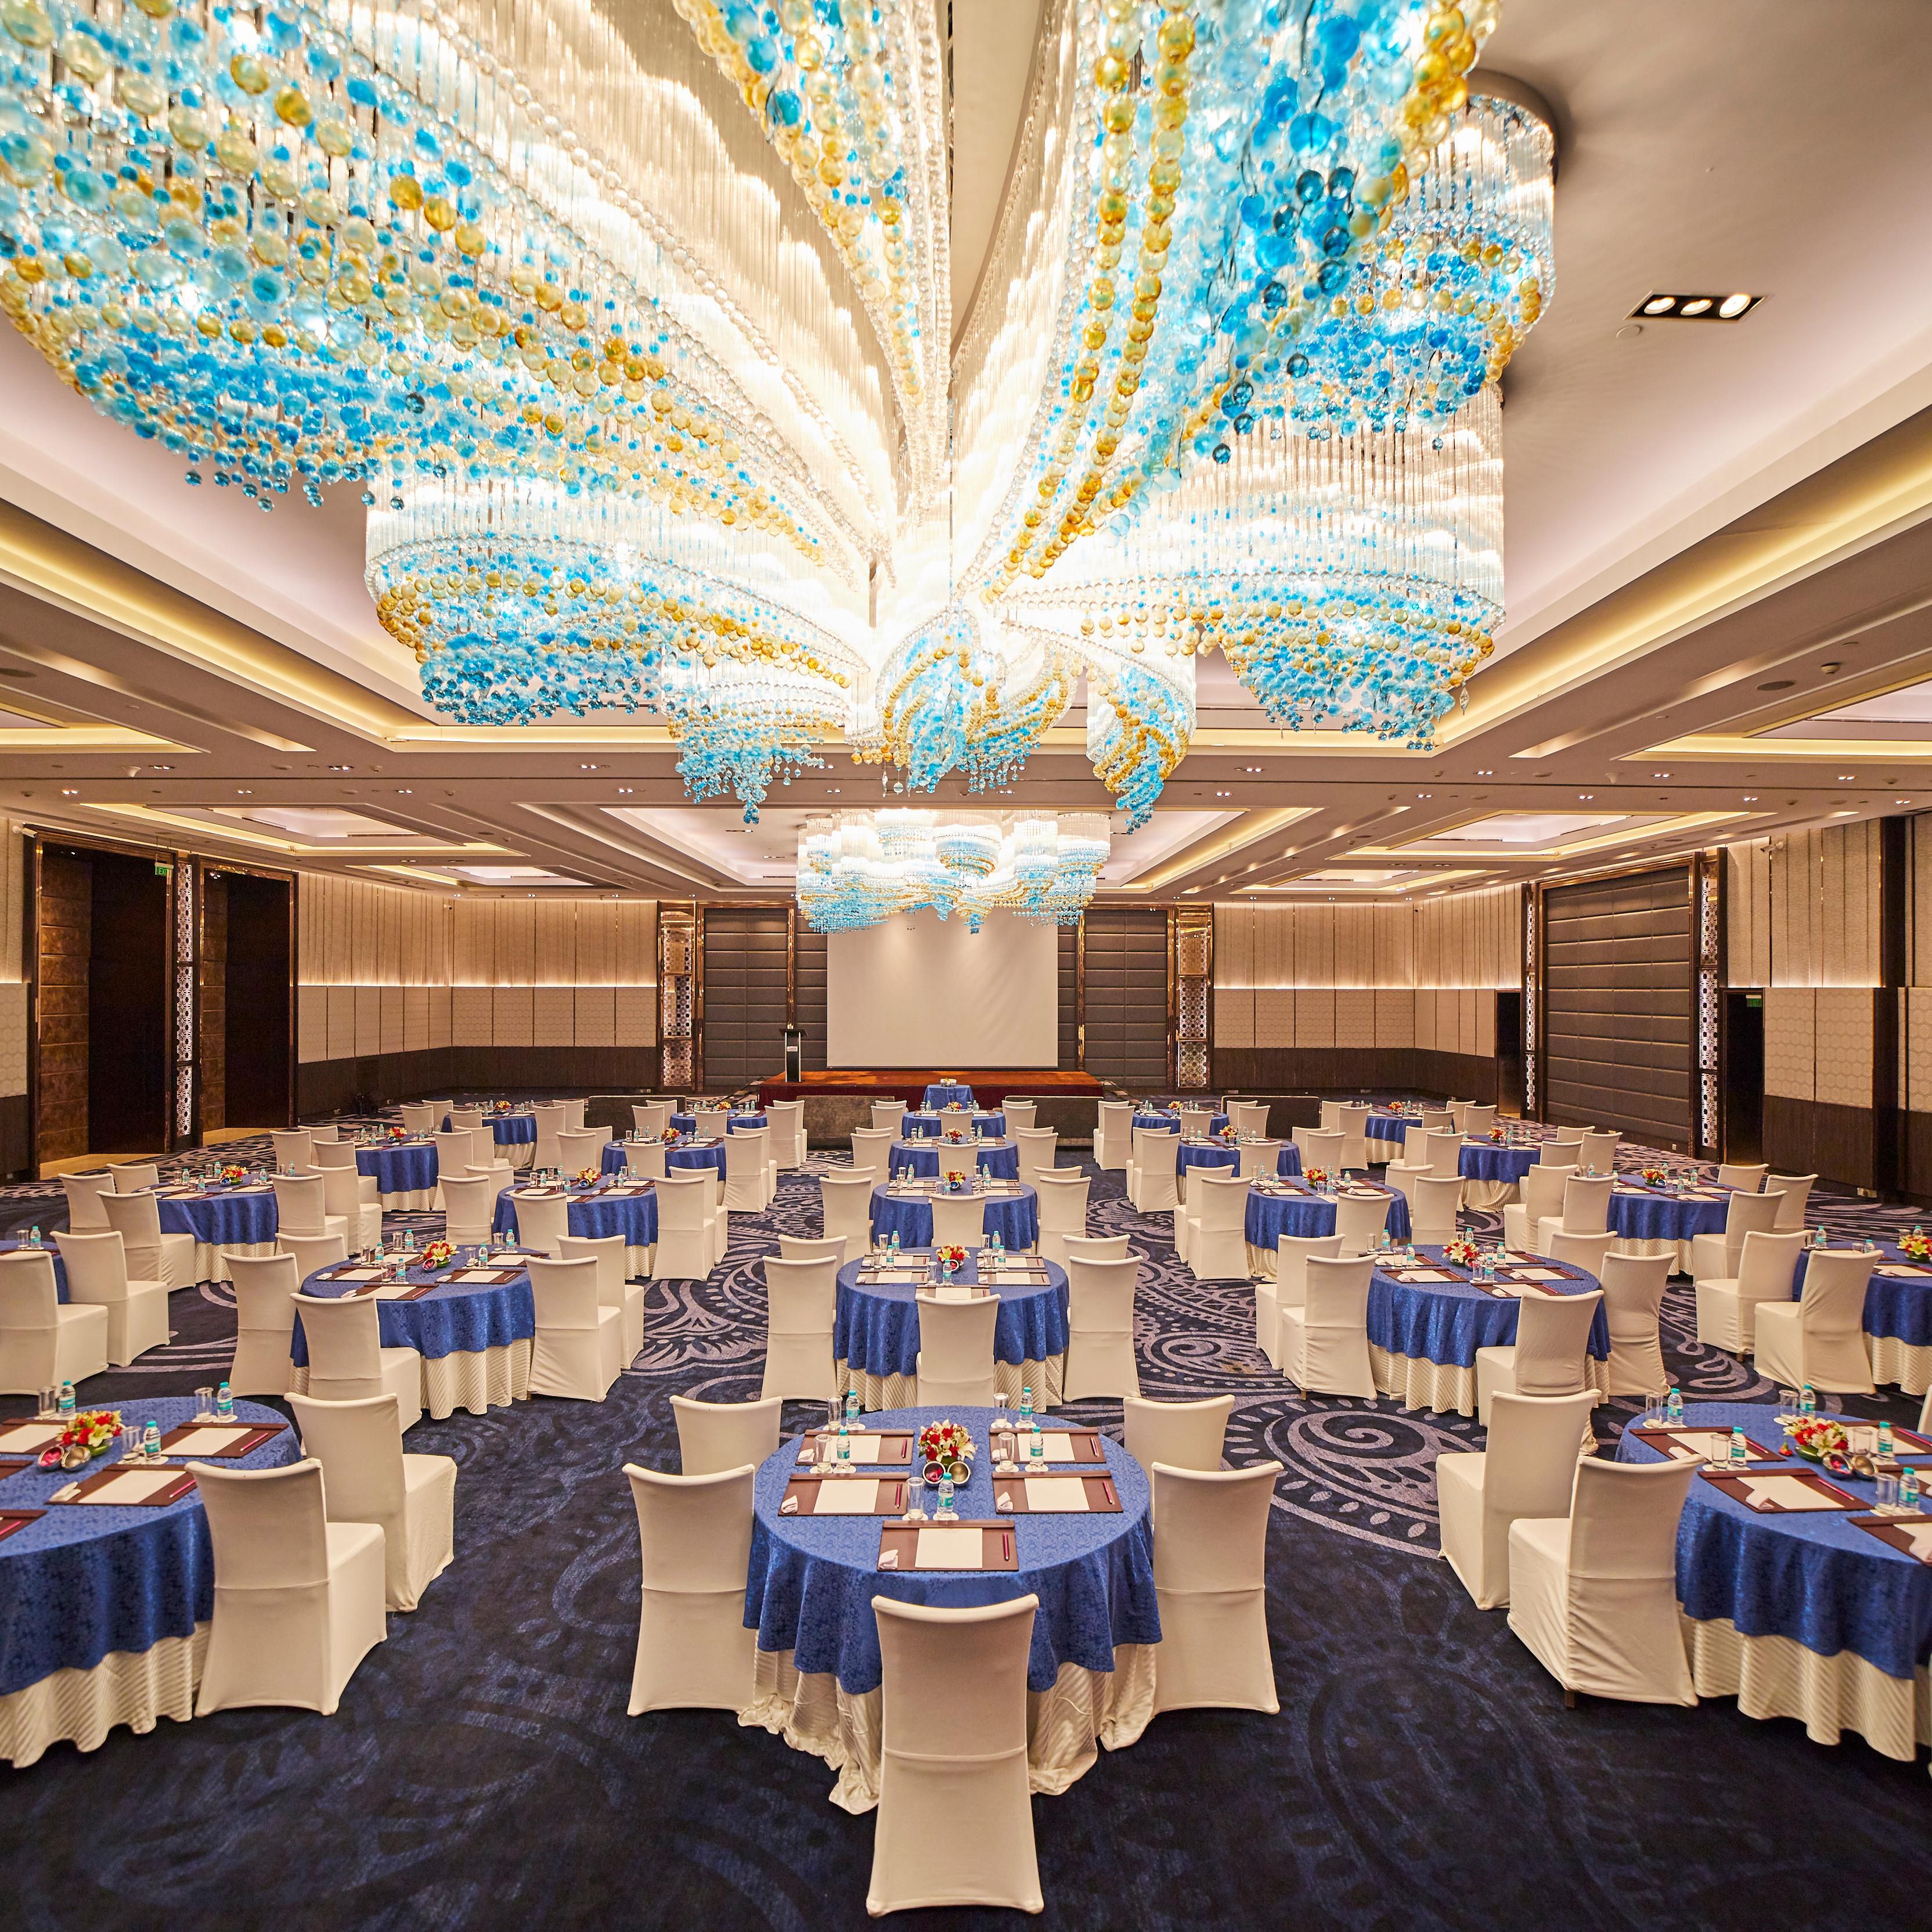 We give you the venue of your choices for meetings &amp; conferences